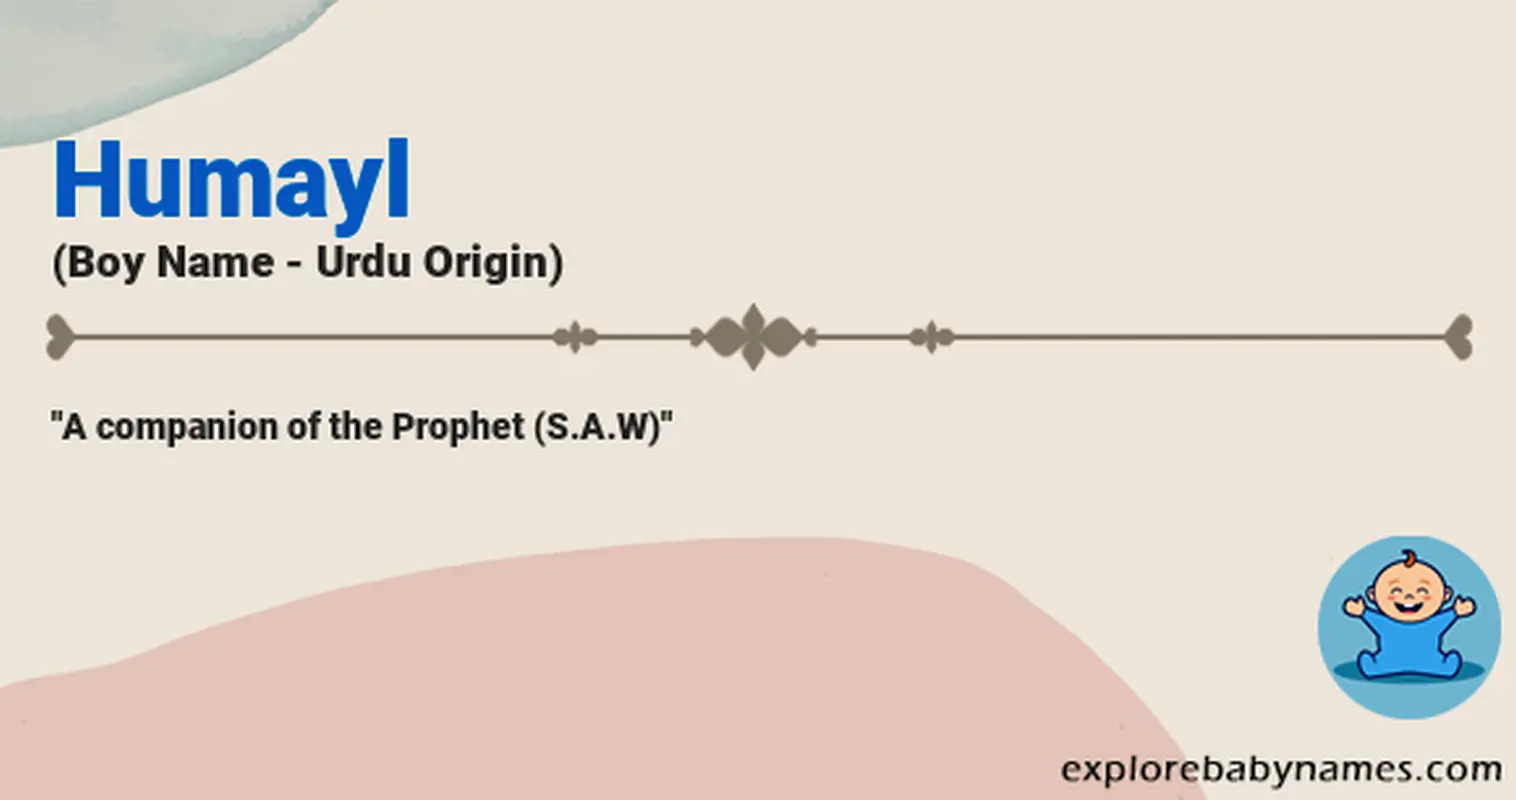 Meaning of Humayl